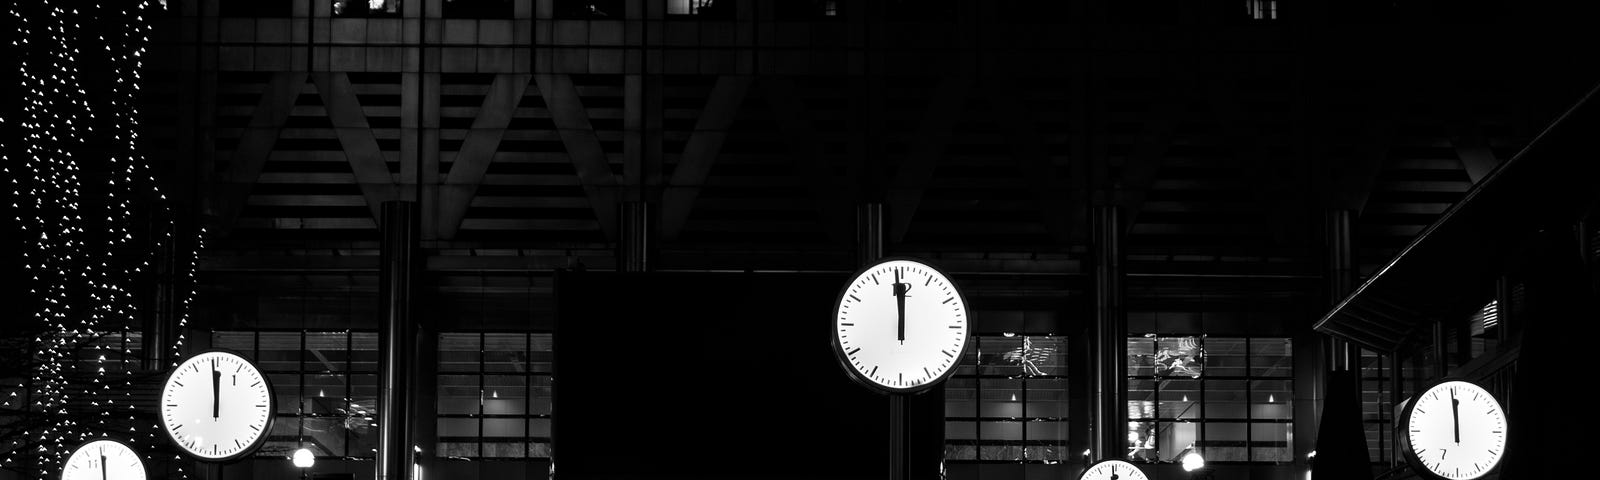 A black and white background of either buildings or stairs with several clocks indicating midnight.